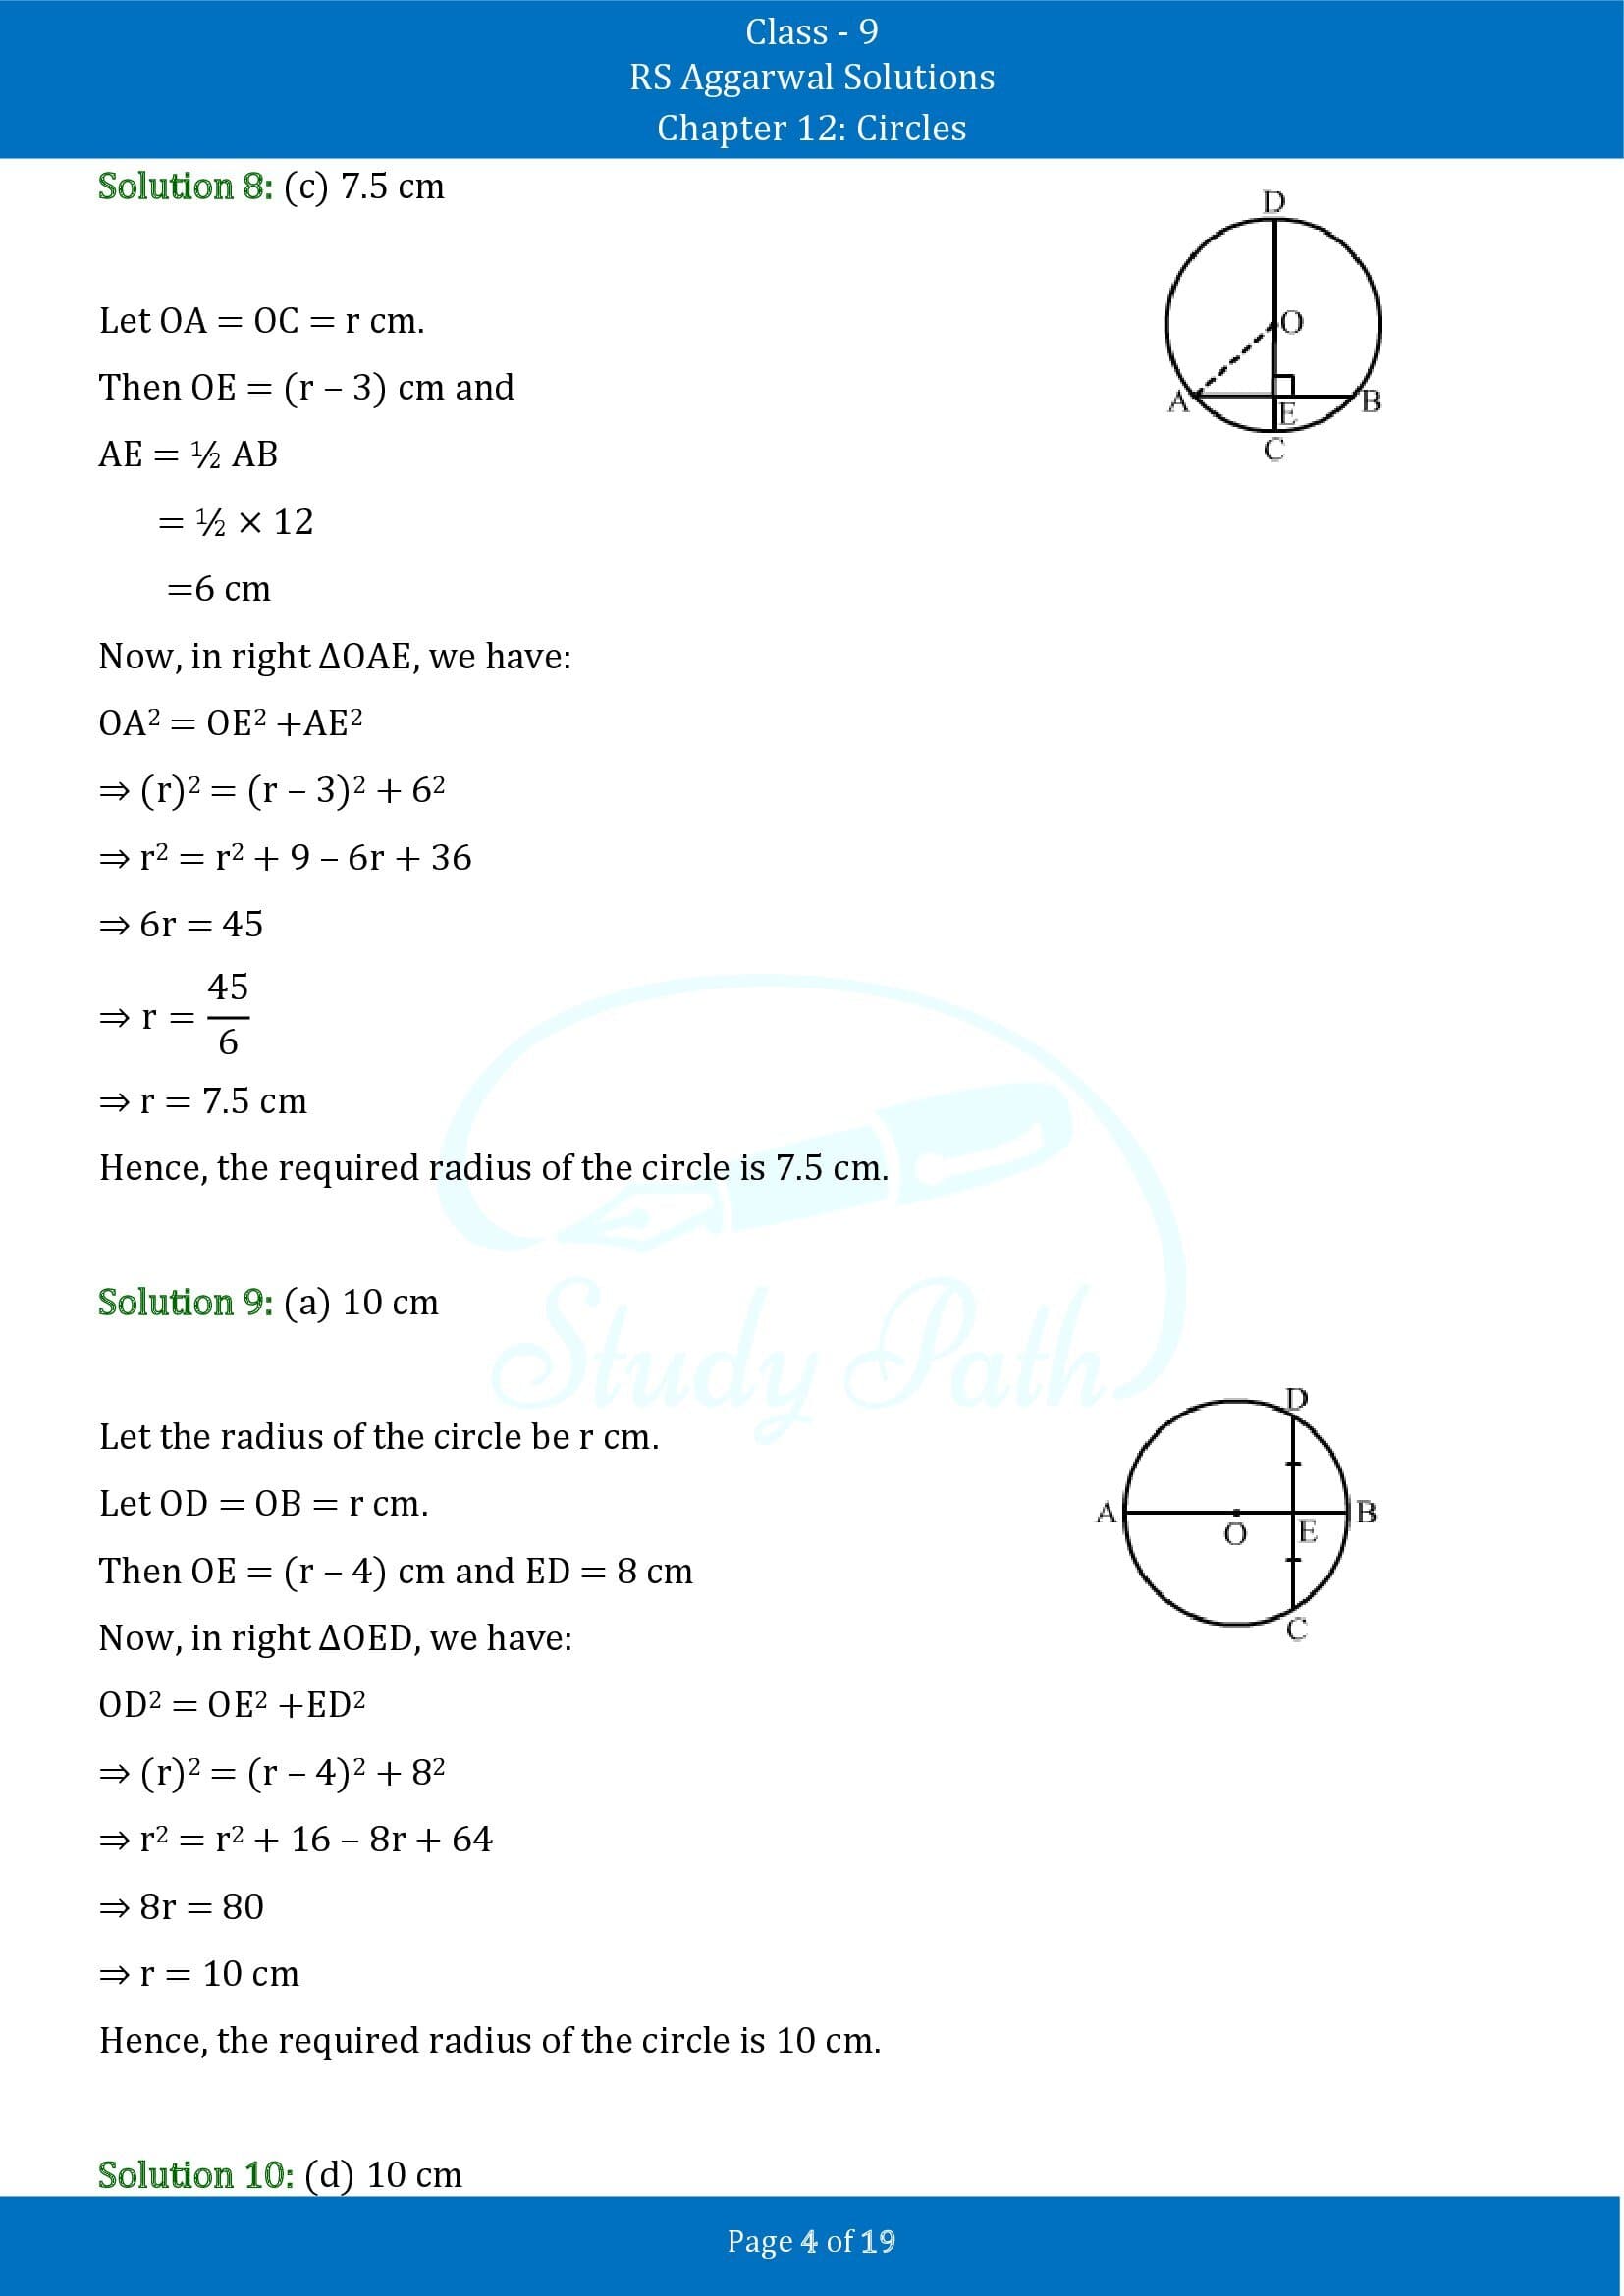 RS Aggarwal Solutions Class 9 Chapter 12 Circles Multiple Choice Questions MCQs 00004